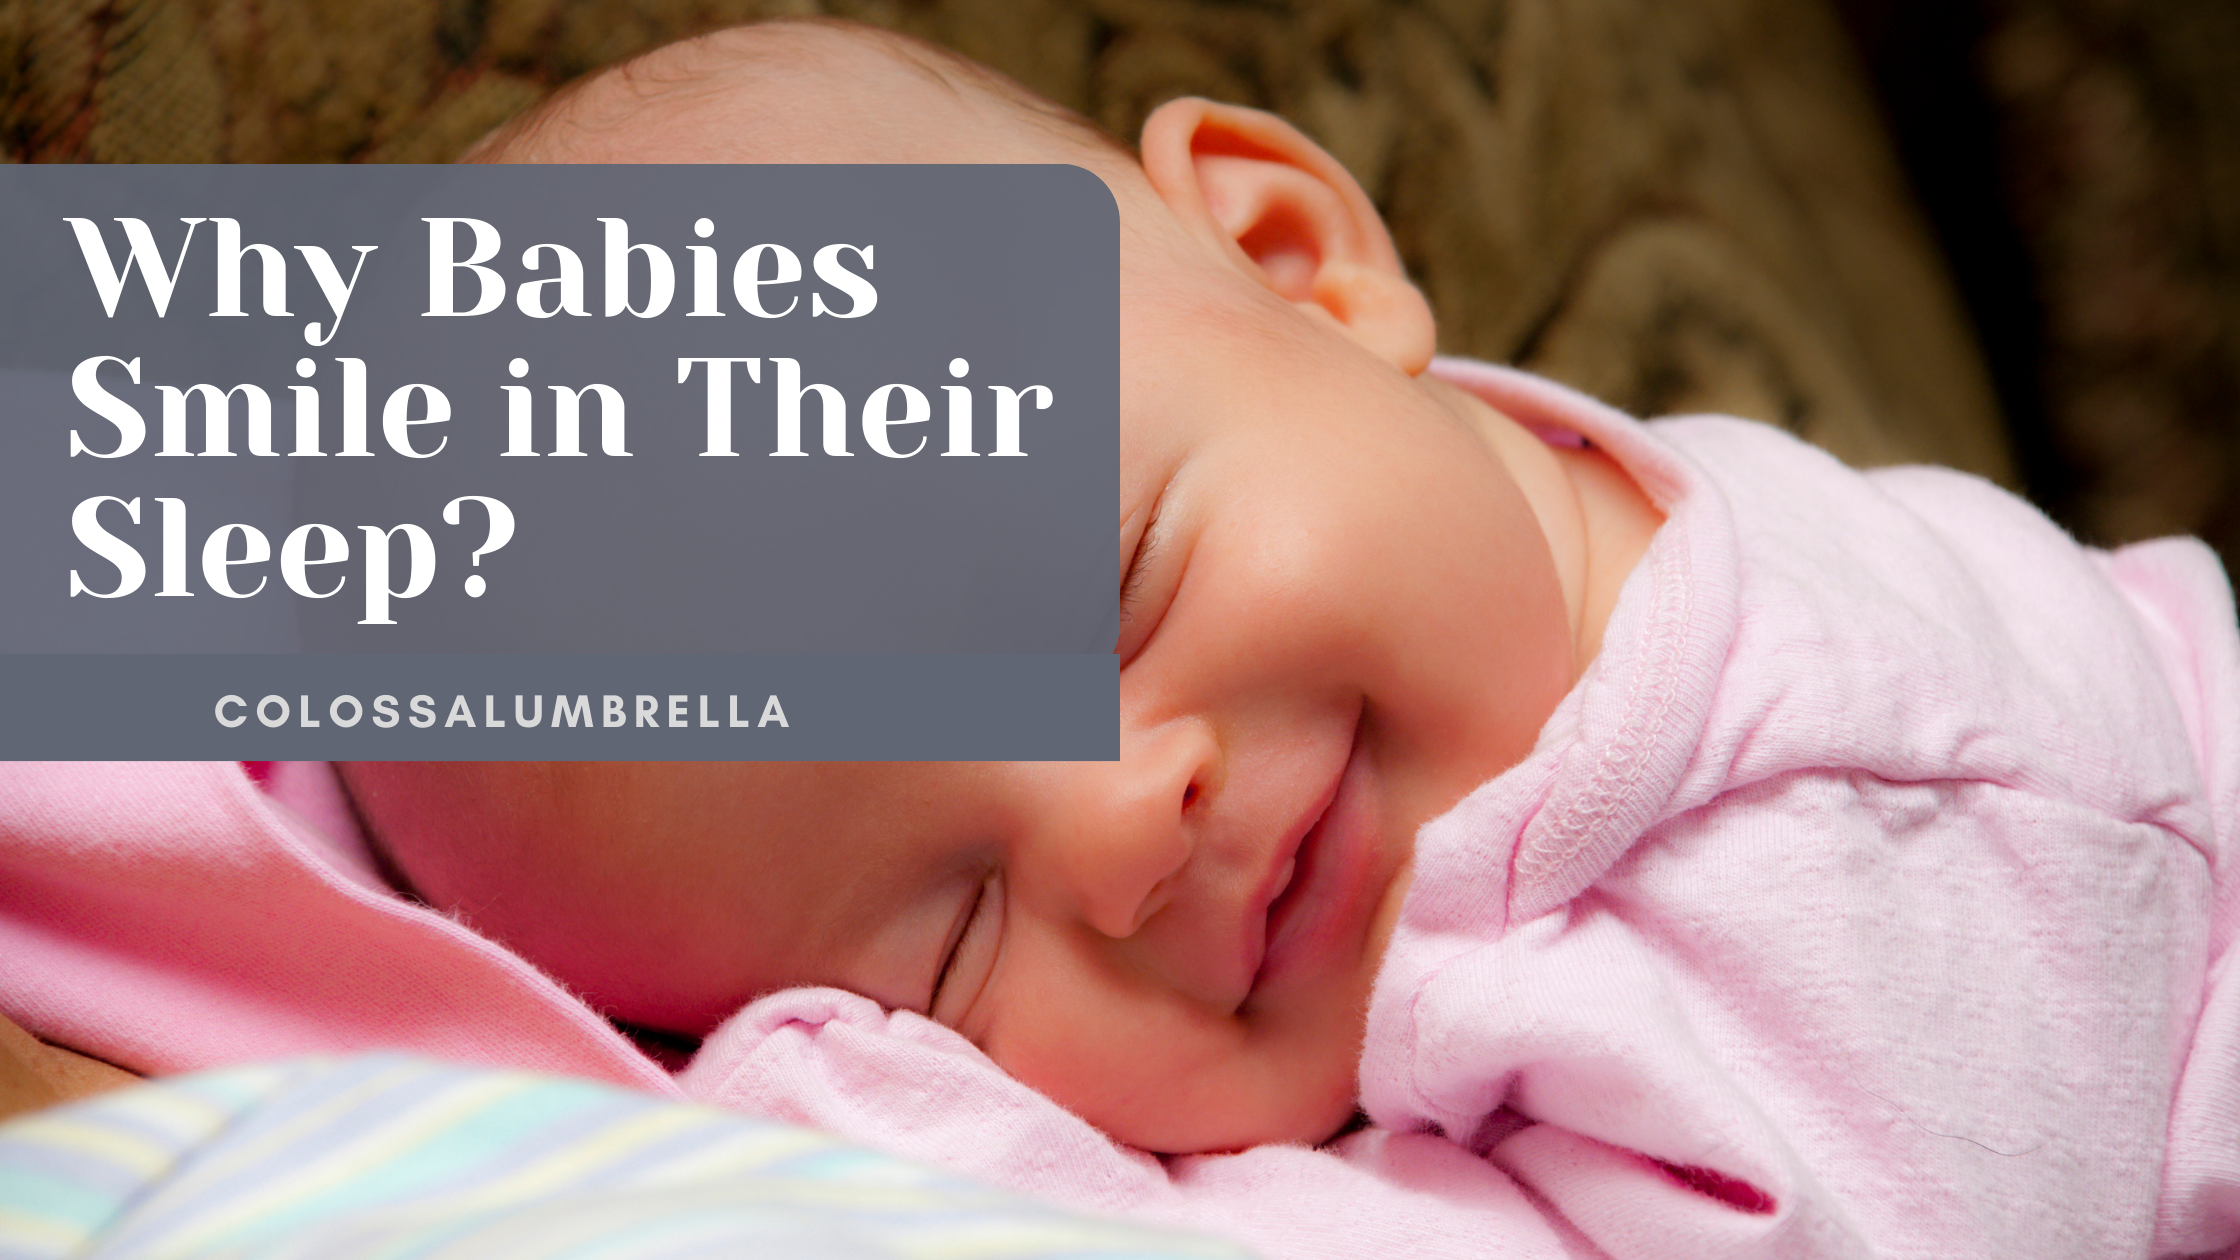 Why Do Babies Smile in Their Sleep? 5 Certified Reasons